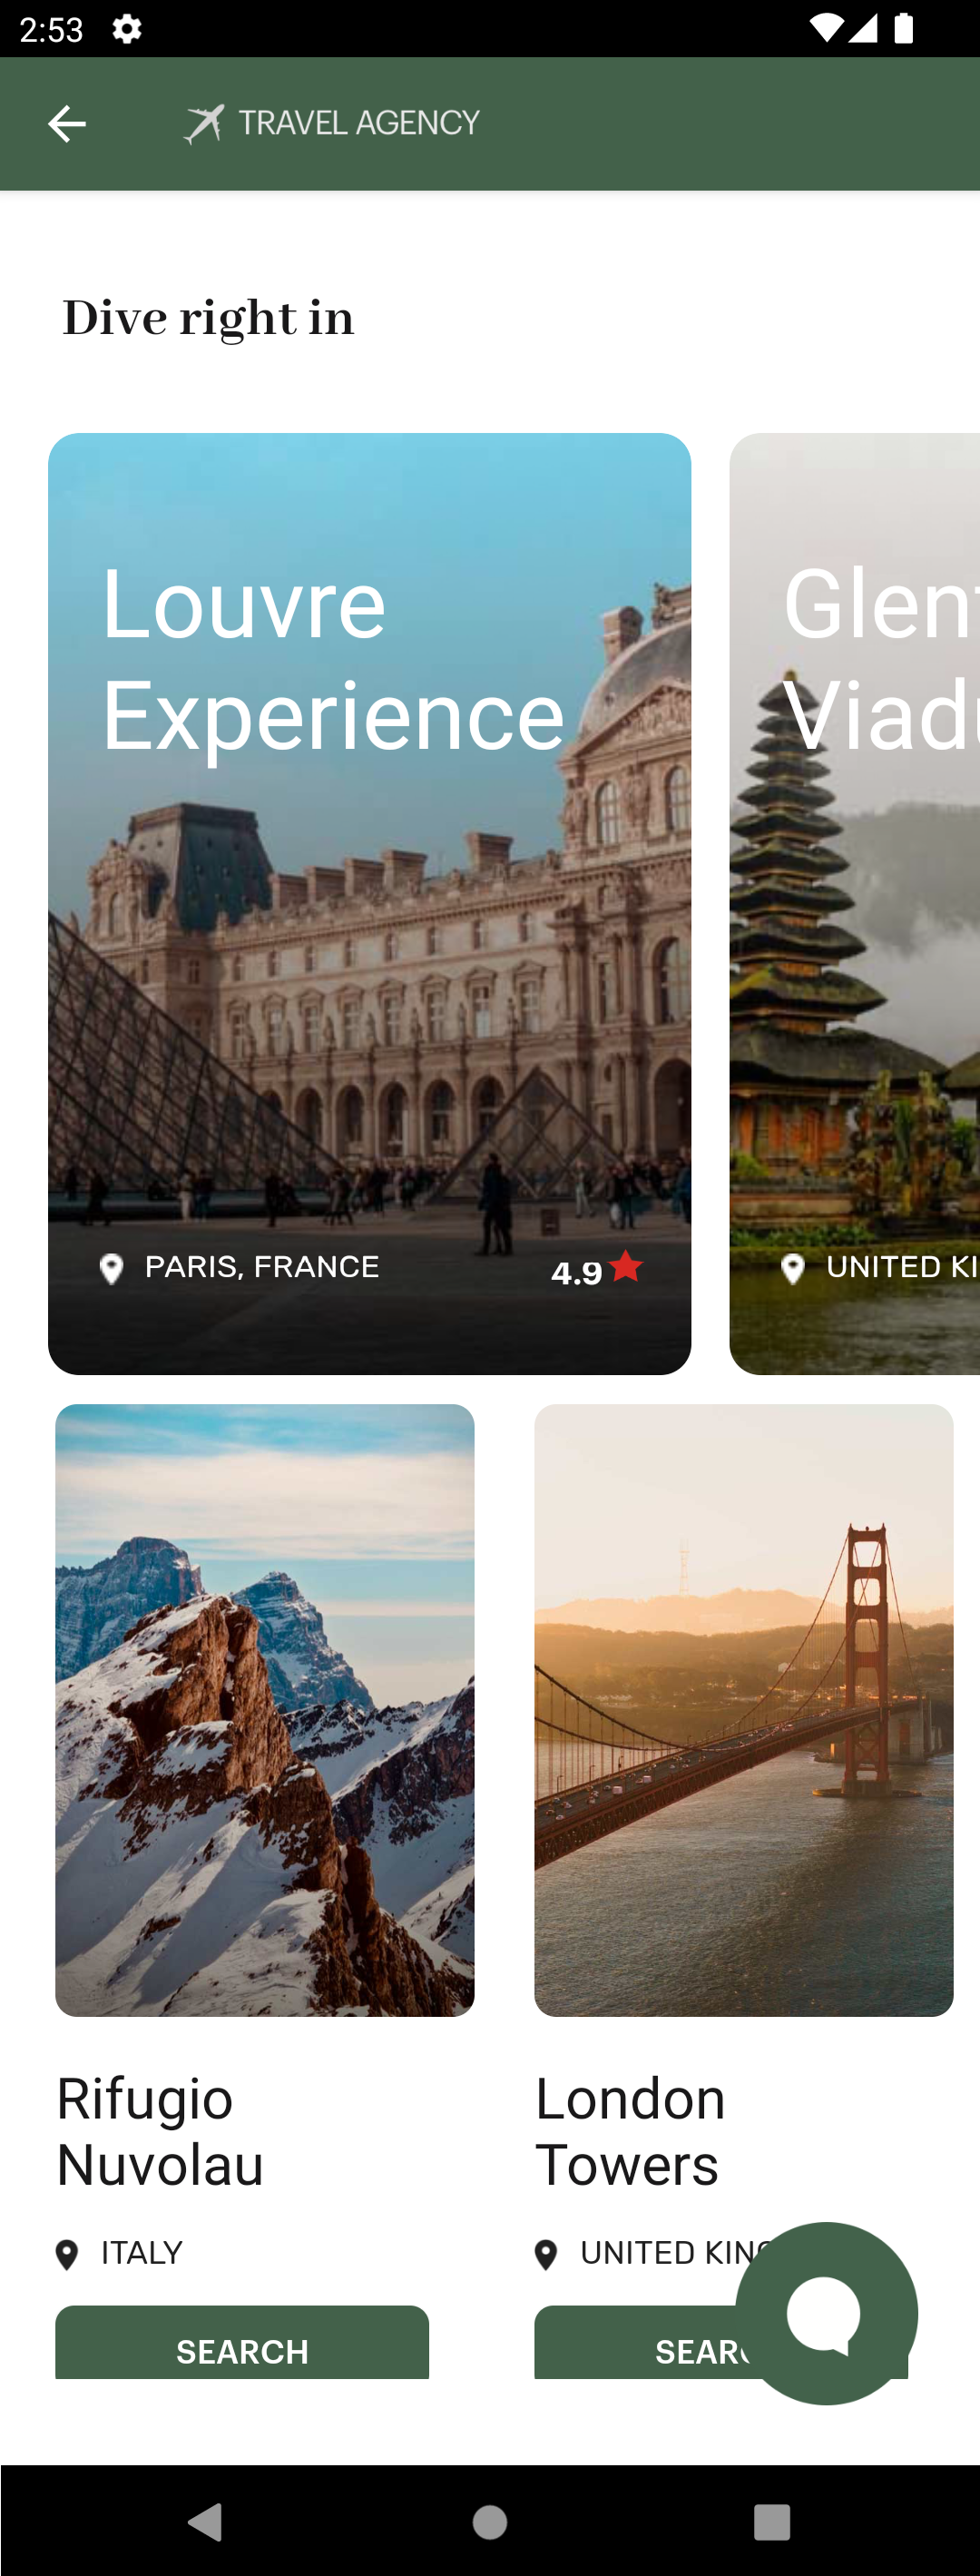 TravelAgency-MultiExperience-AndroidPhone-Attracions_2021102516303_1_png